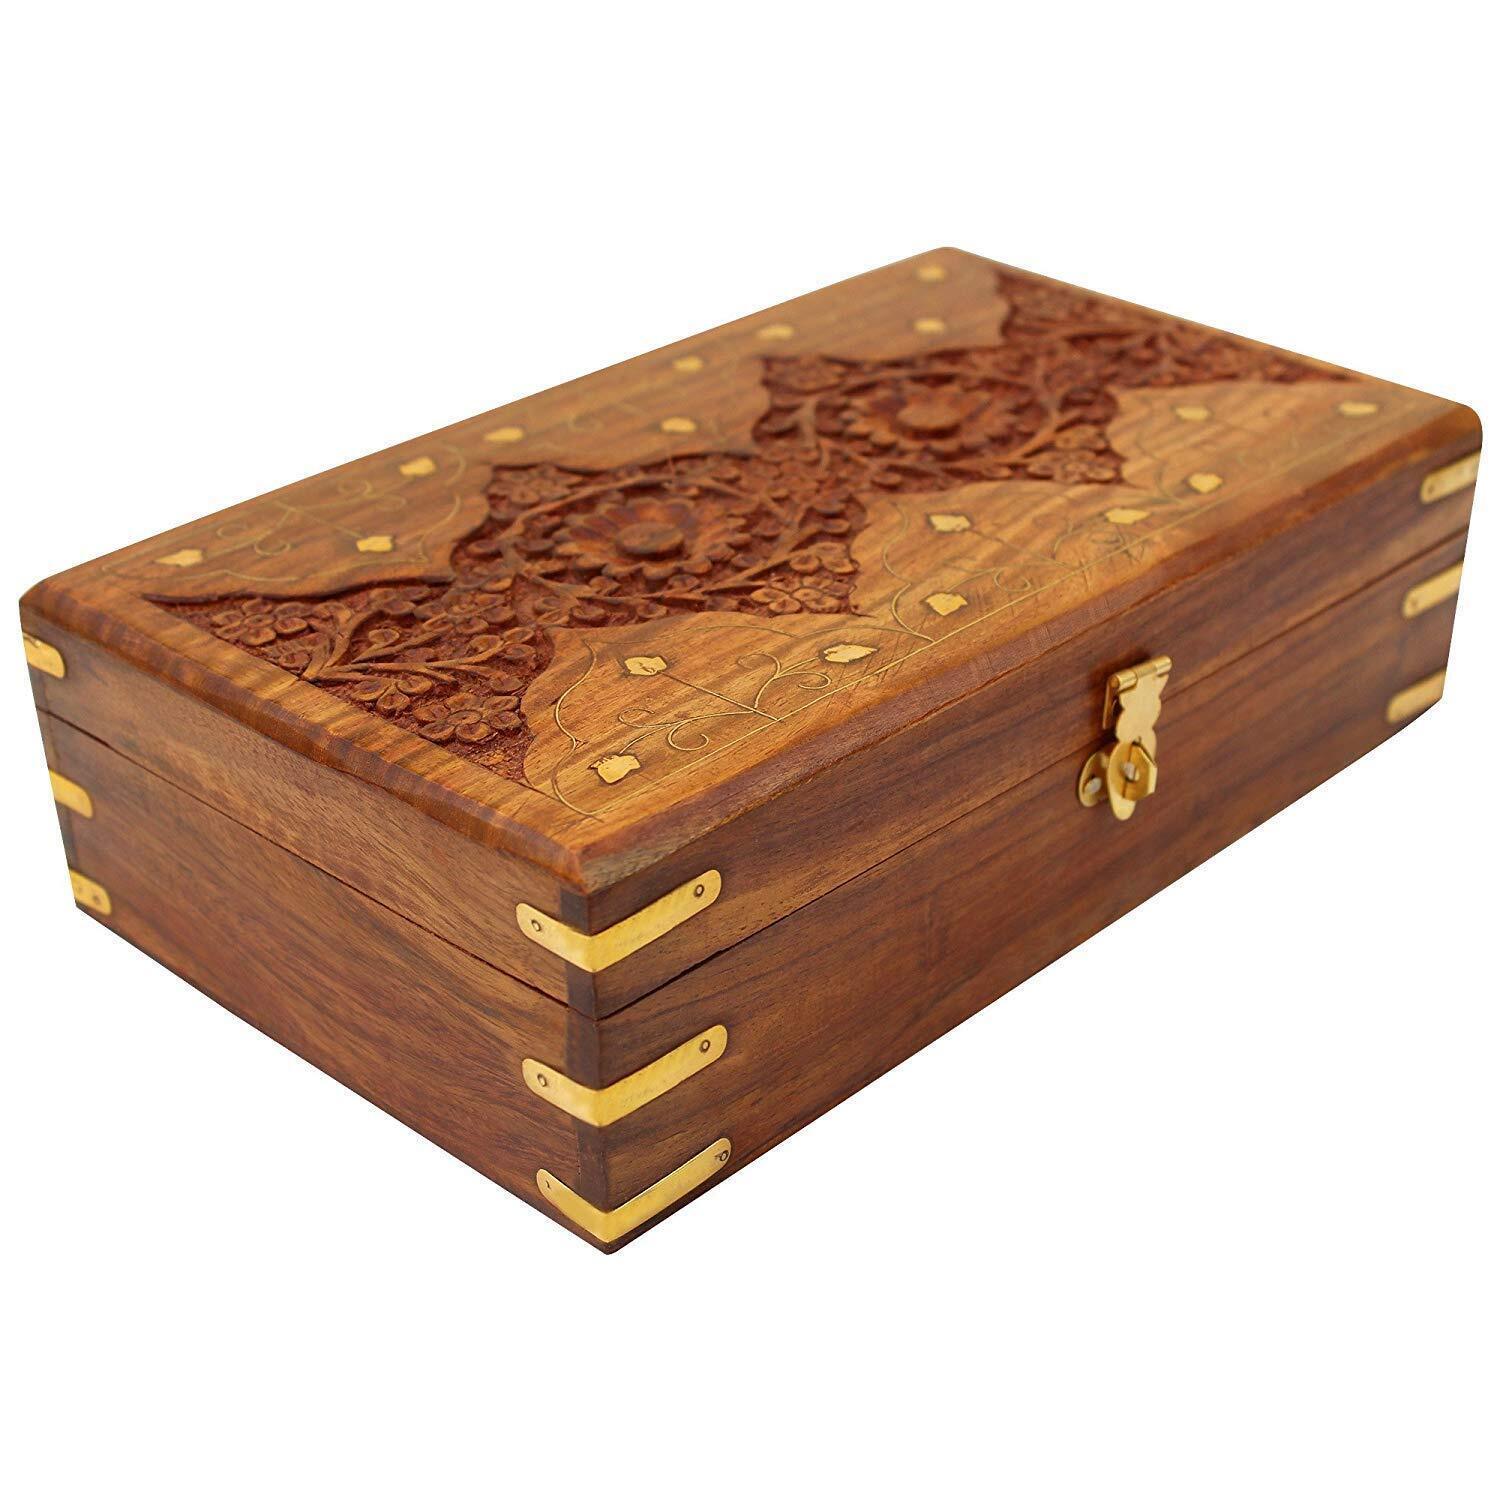 Handmade Wooden Jewellery Box for Women Jewel Organizer Hand Carved Carvings Gif - $31.90